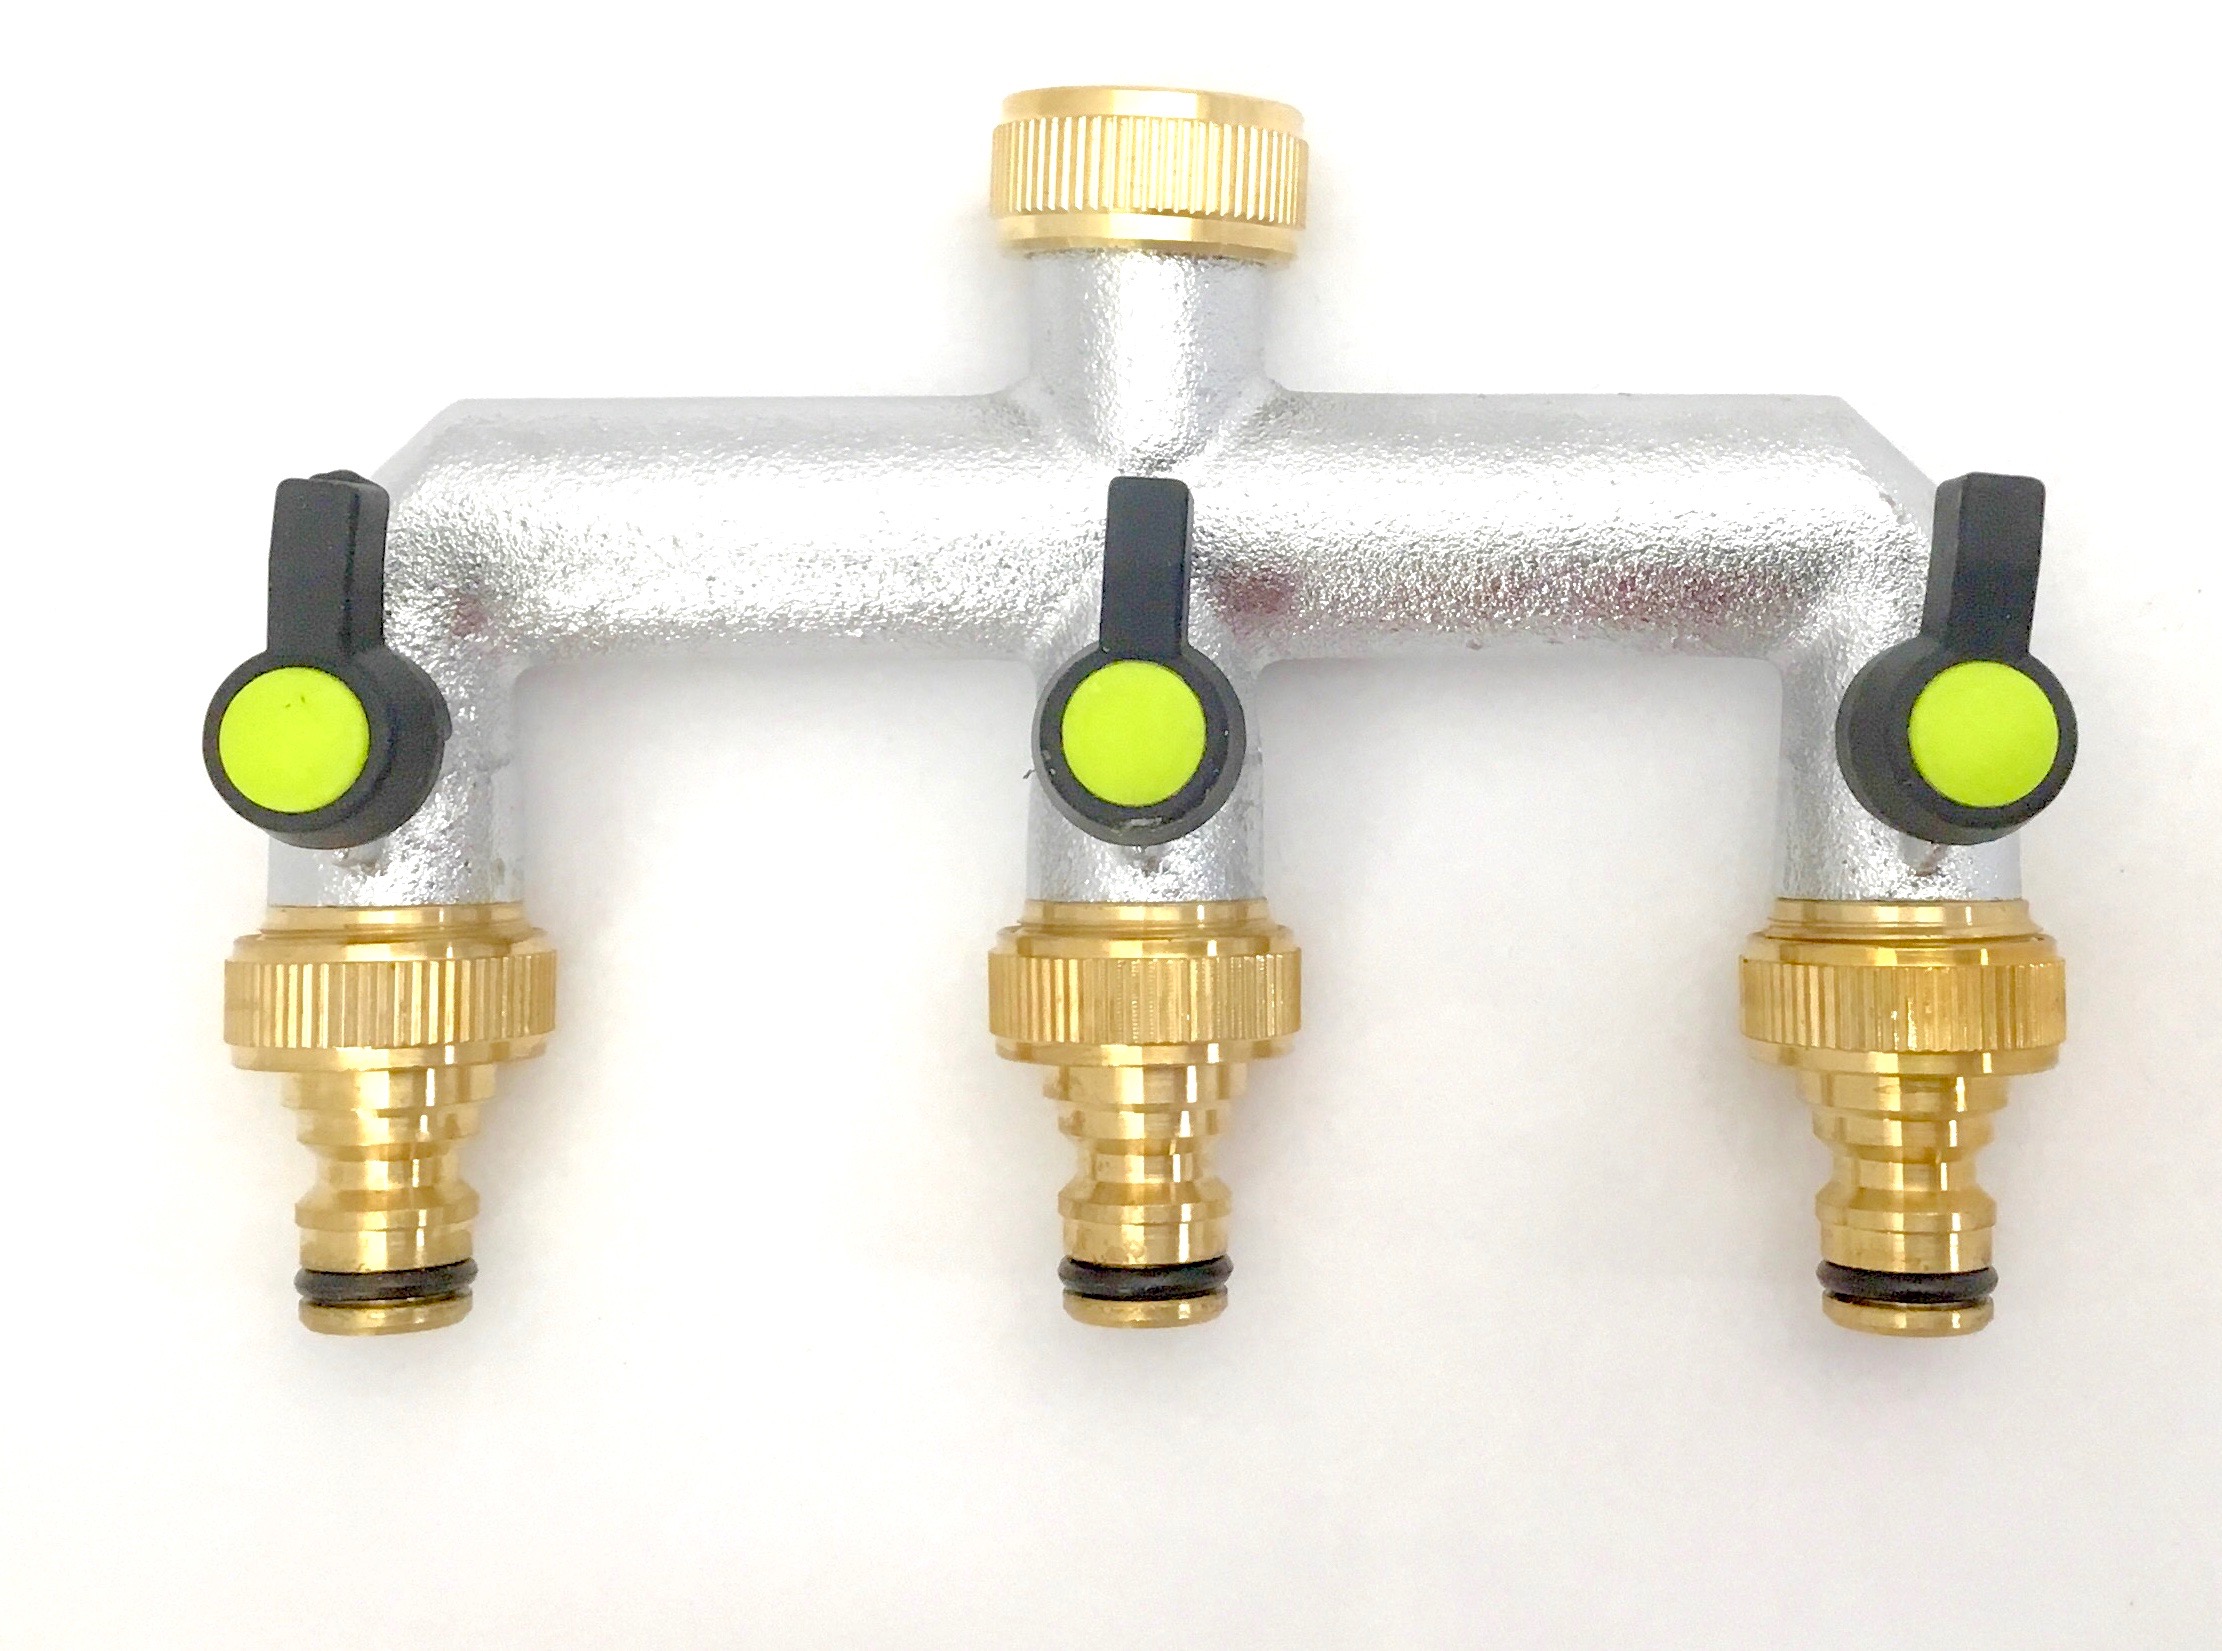 Three Hose Connection for Timers onto Garden Taps